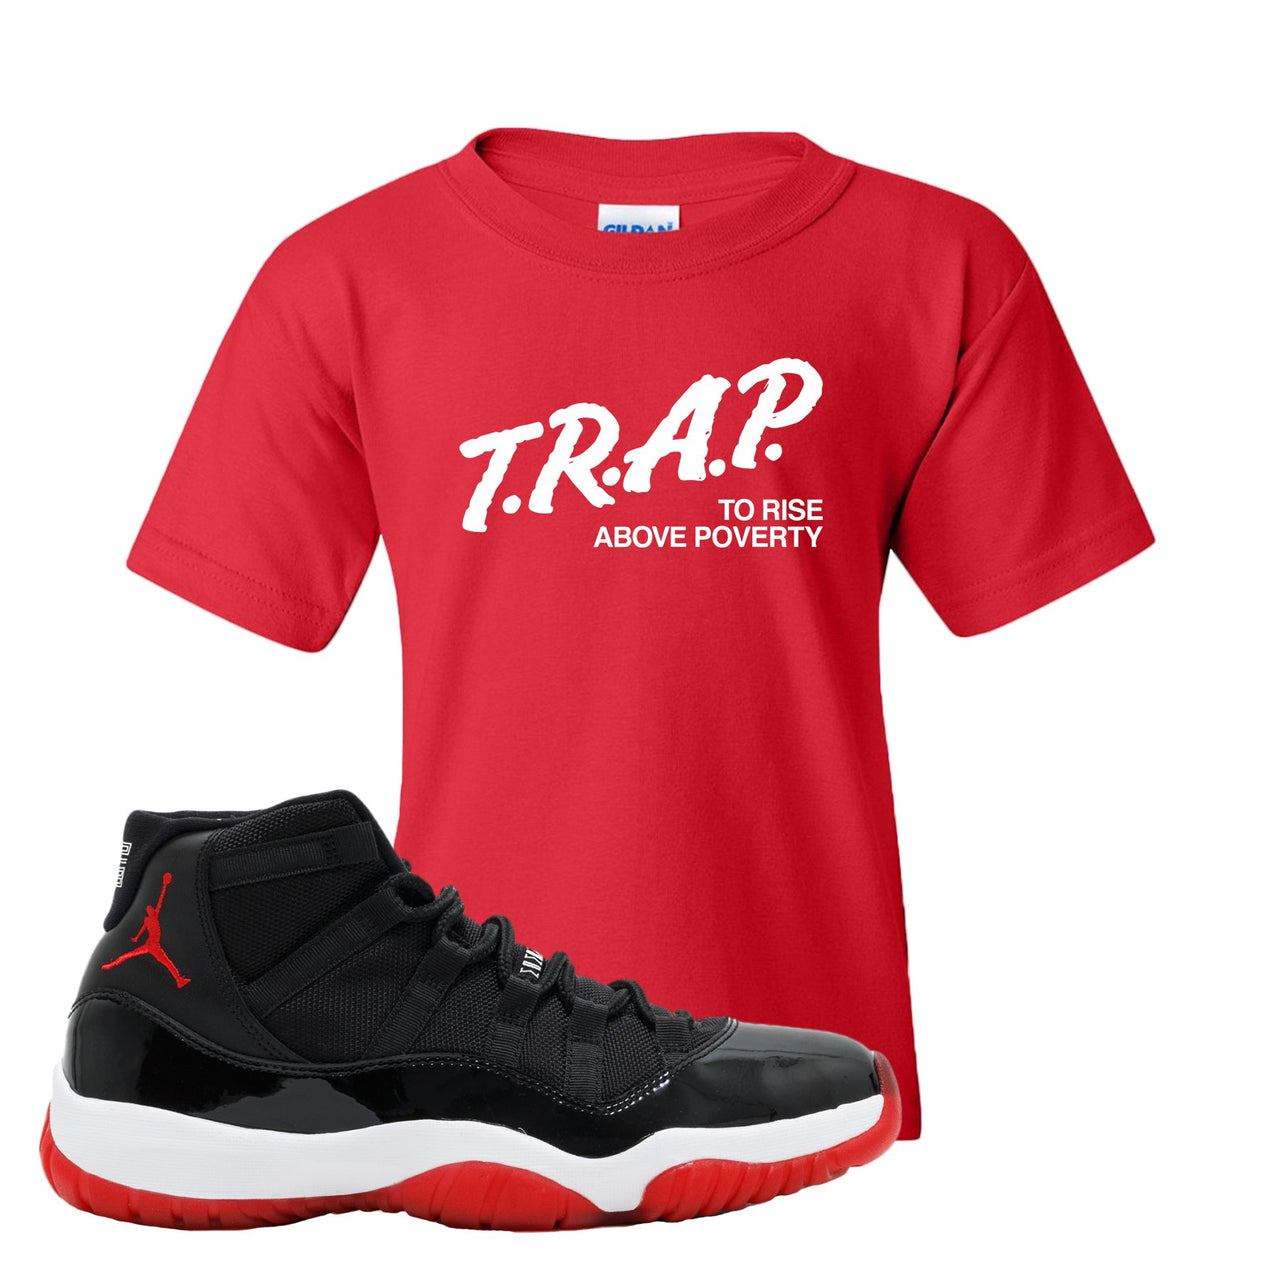 Jordan 11 Bred Trap To Rise Above Poverty Red Sneaker Hook Up Kid's T-Shirt